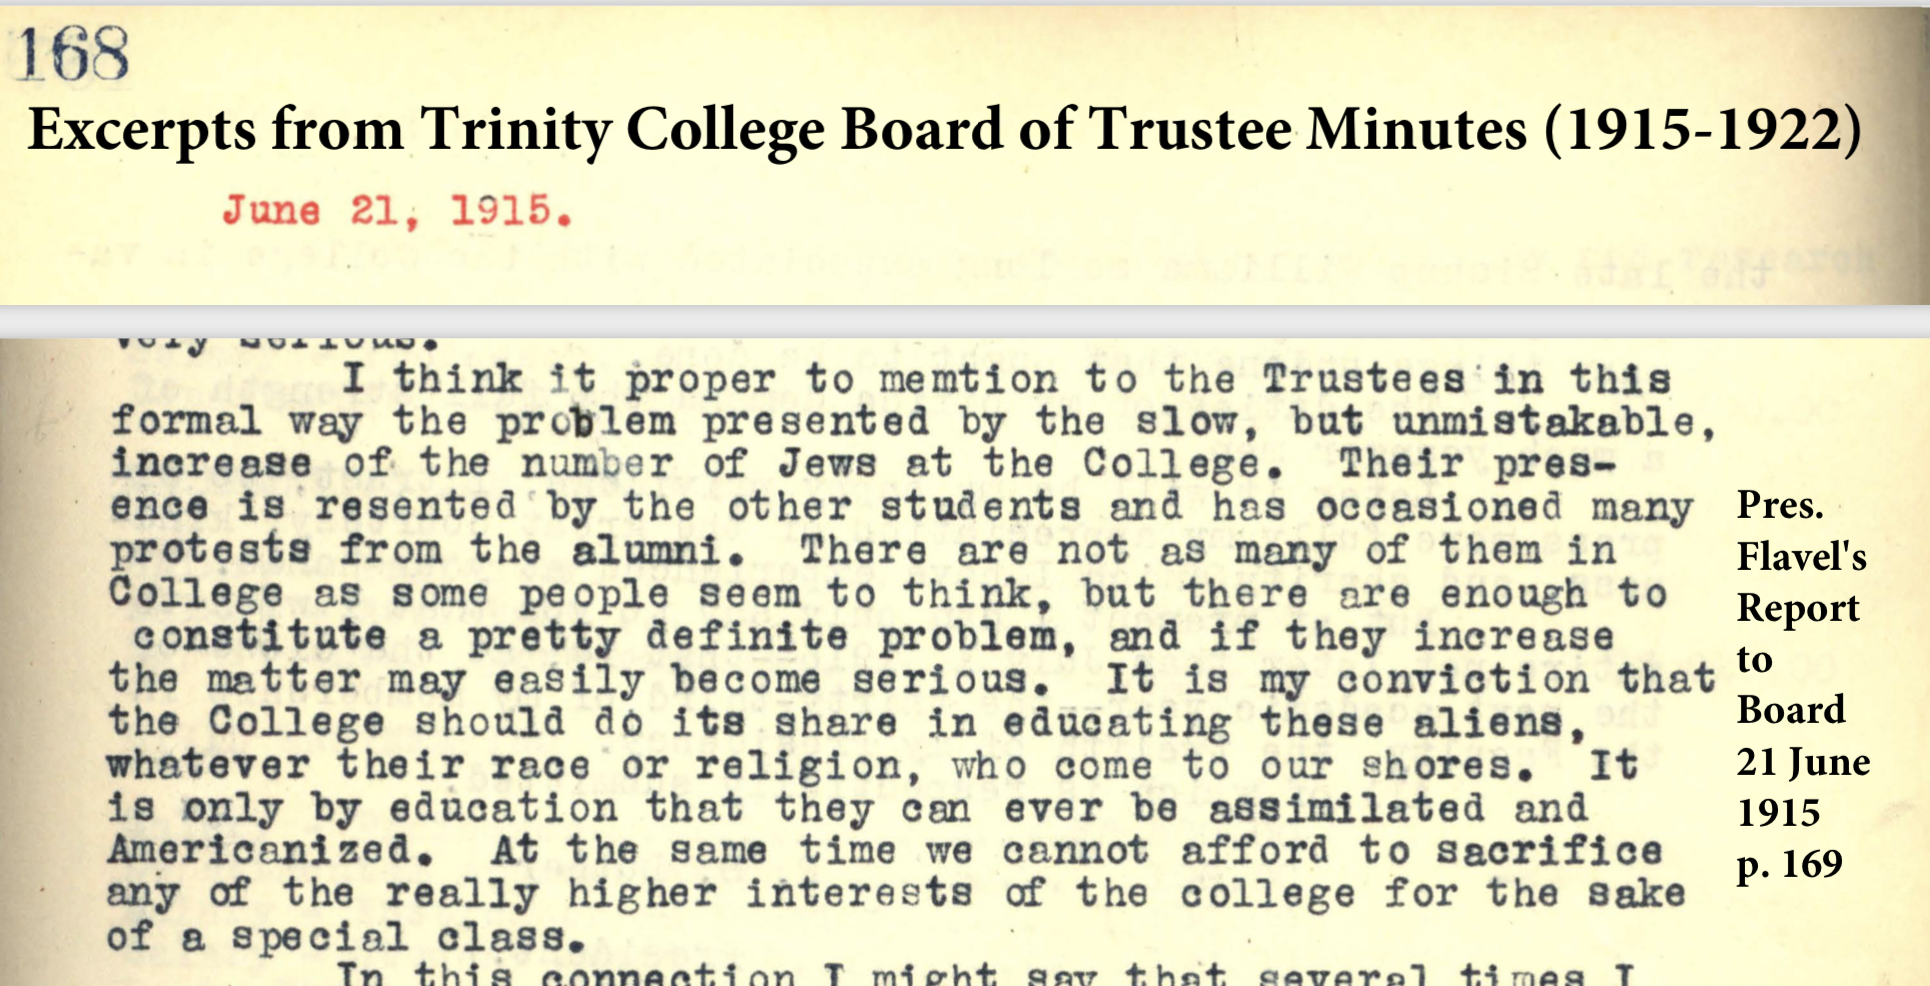 Excerpt of Trinity College President Rev. Flavel S. Luther’s closed-door statement against Jewish students in 1915 board minutes. Read more about the words and actions of Trinity’s leaders in the supplemental chapter later in this book, Uncovering Unwritten Rules Against Jewish and Black Students at Trinity College.